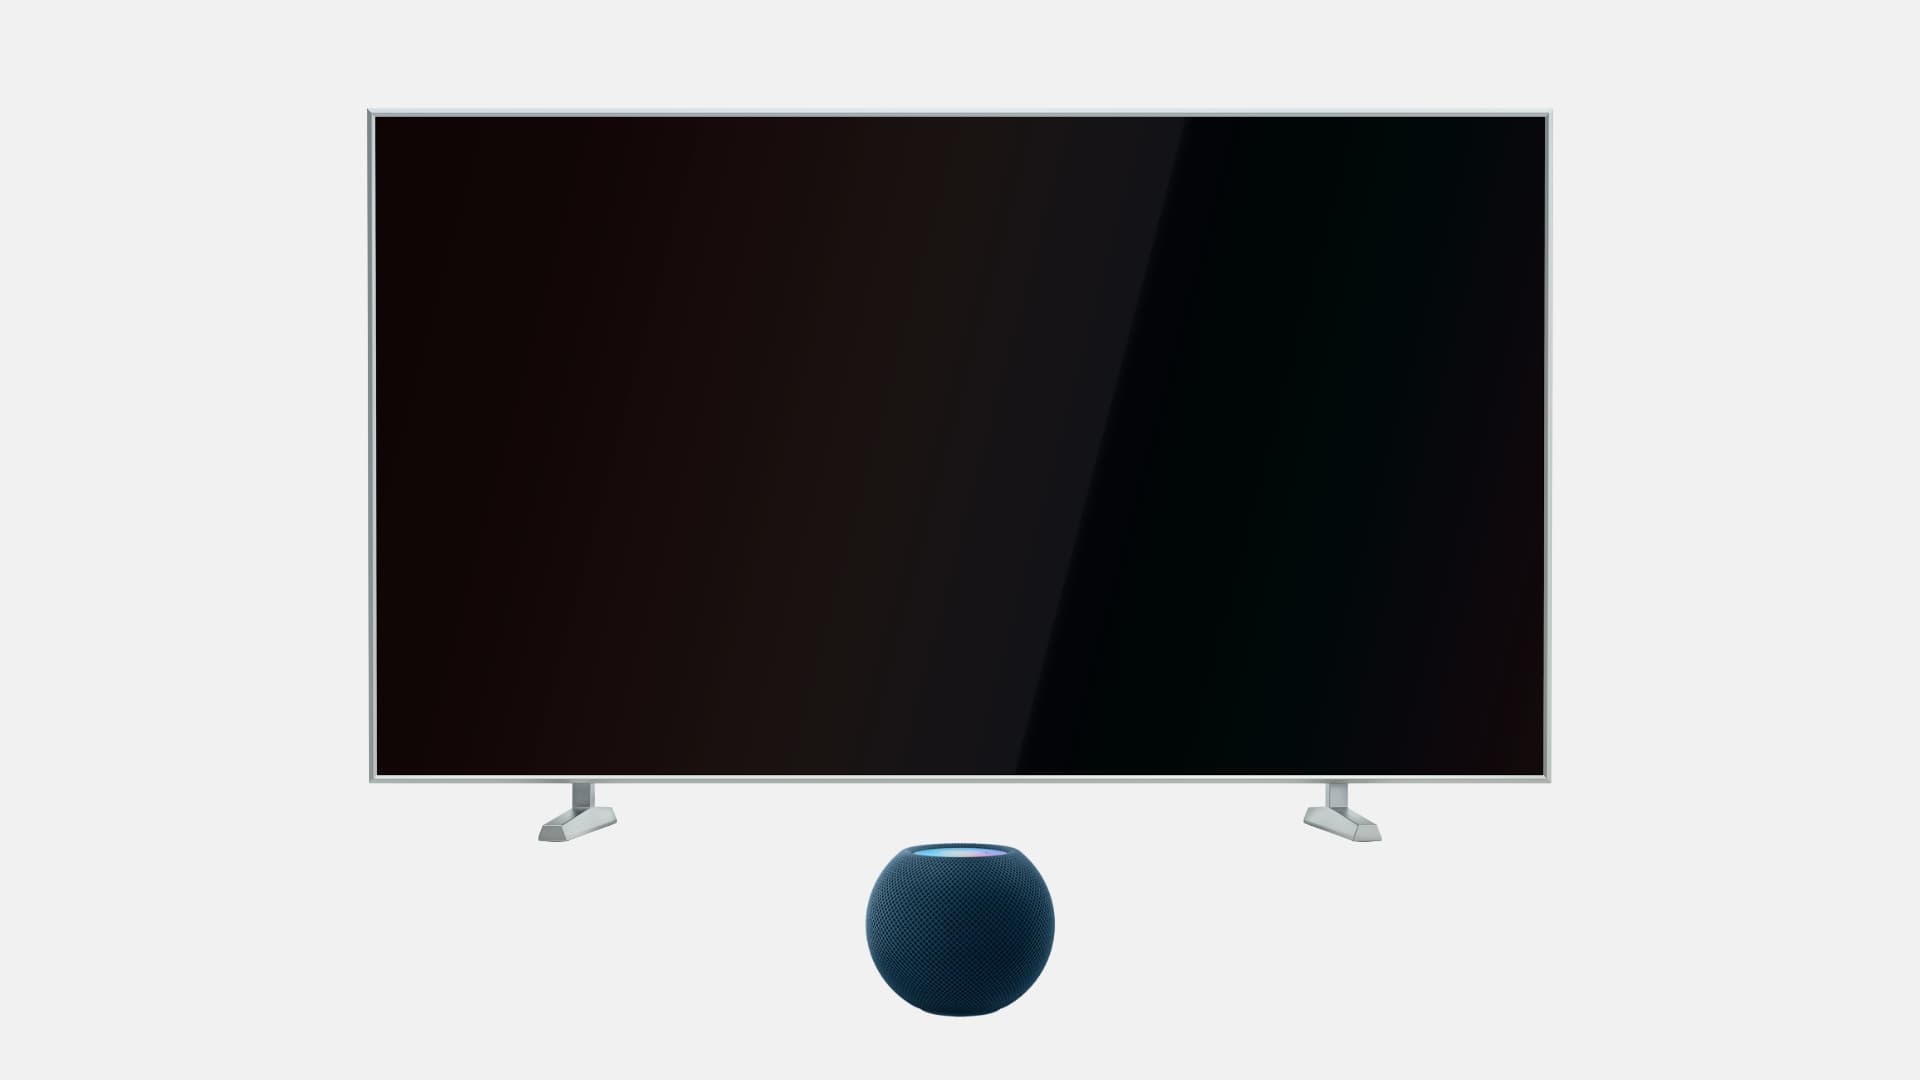 One HomePod in center front of TV